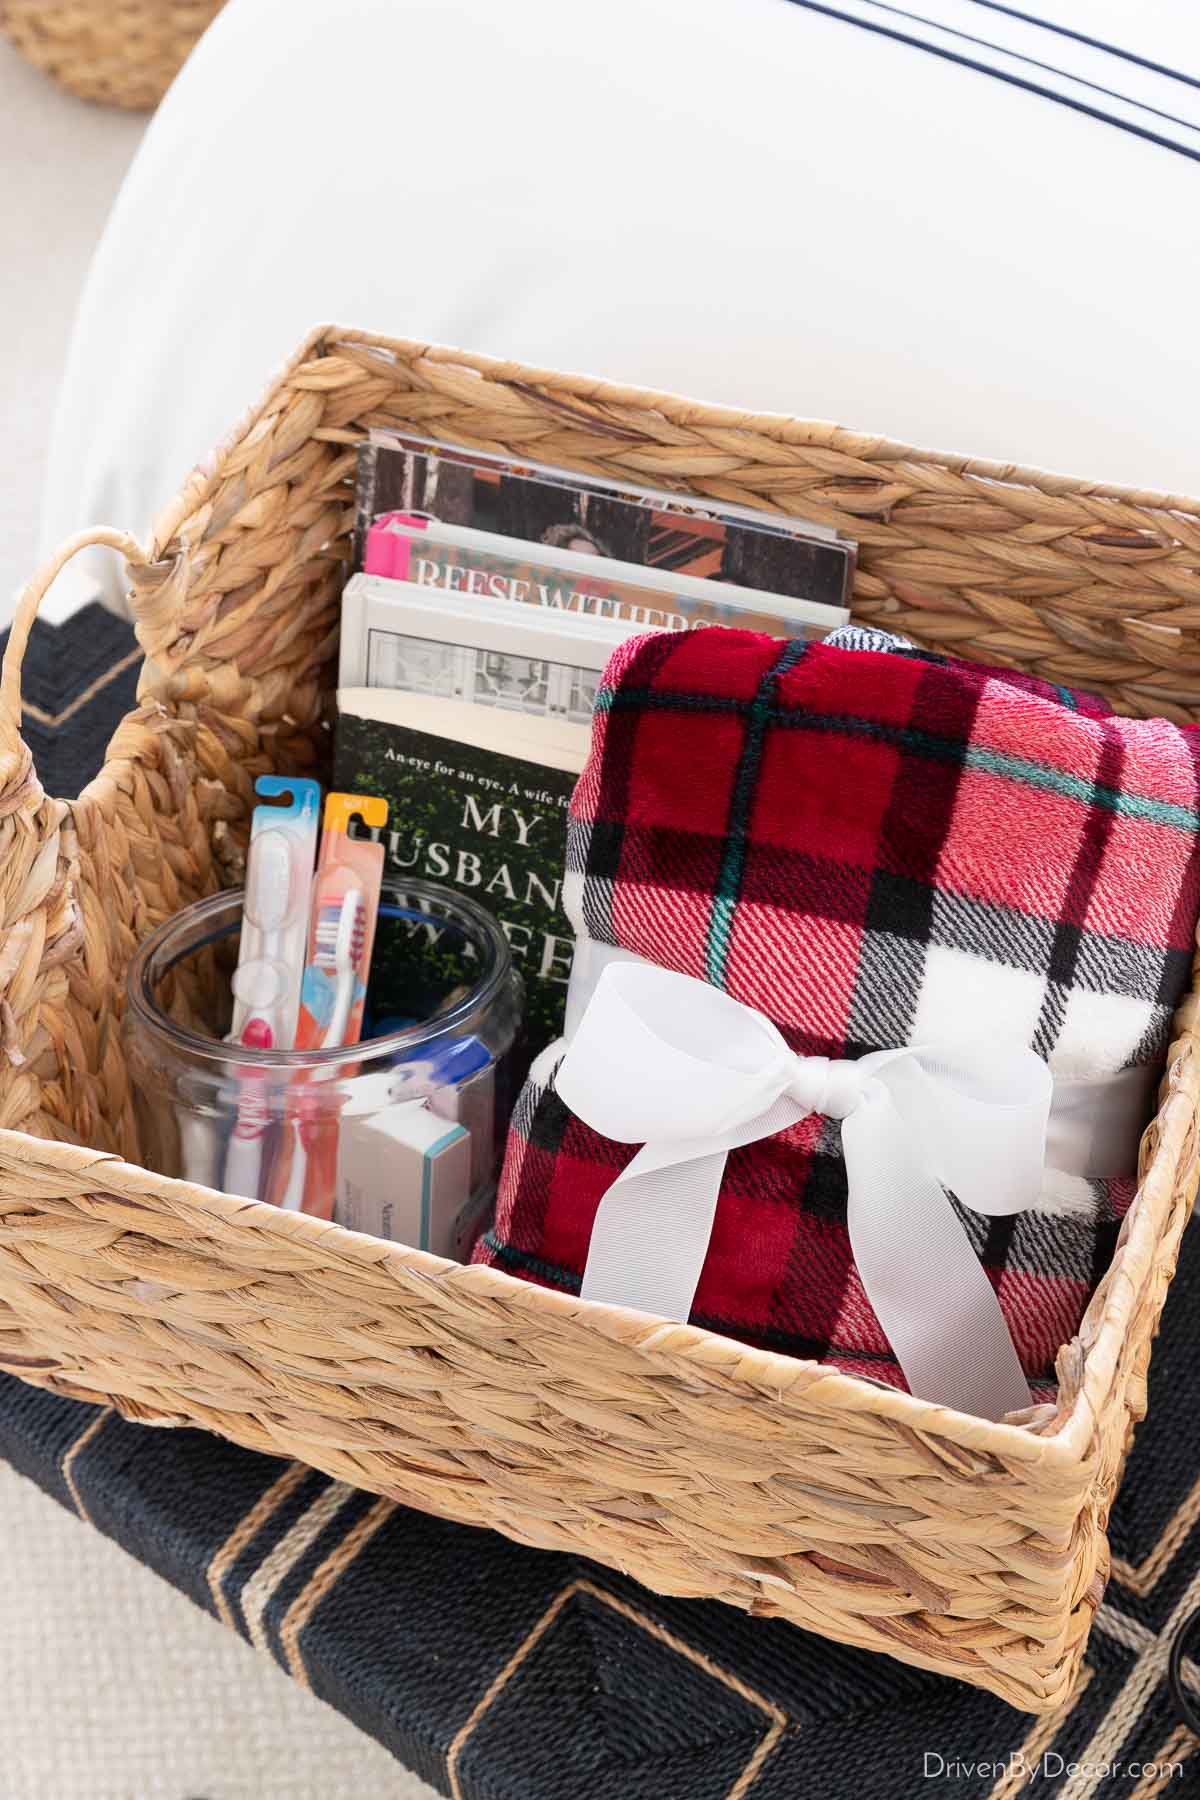 Basket with books, toiletries, and throw blanket for guests